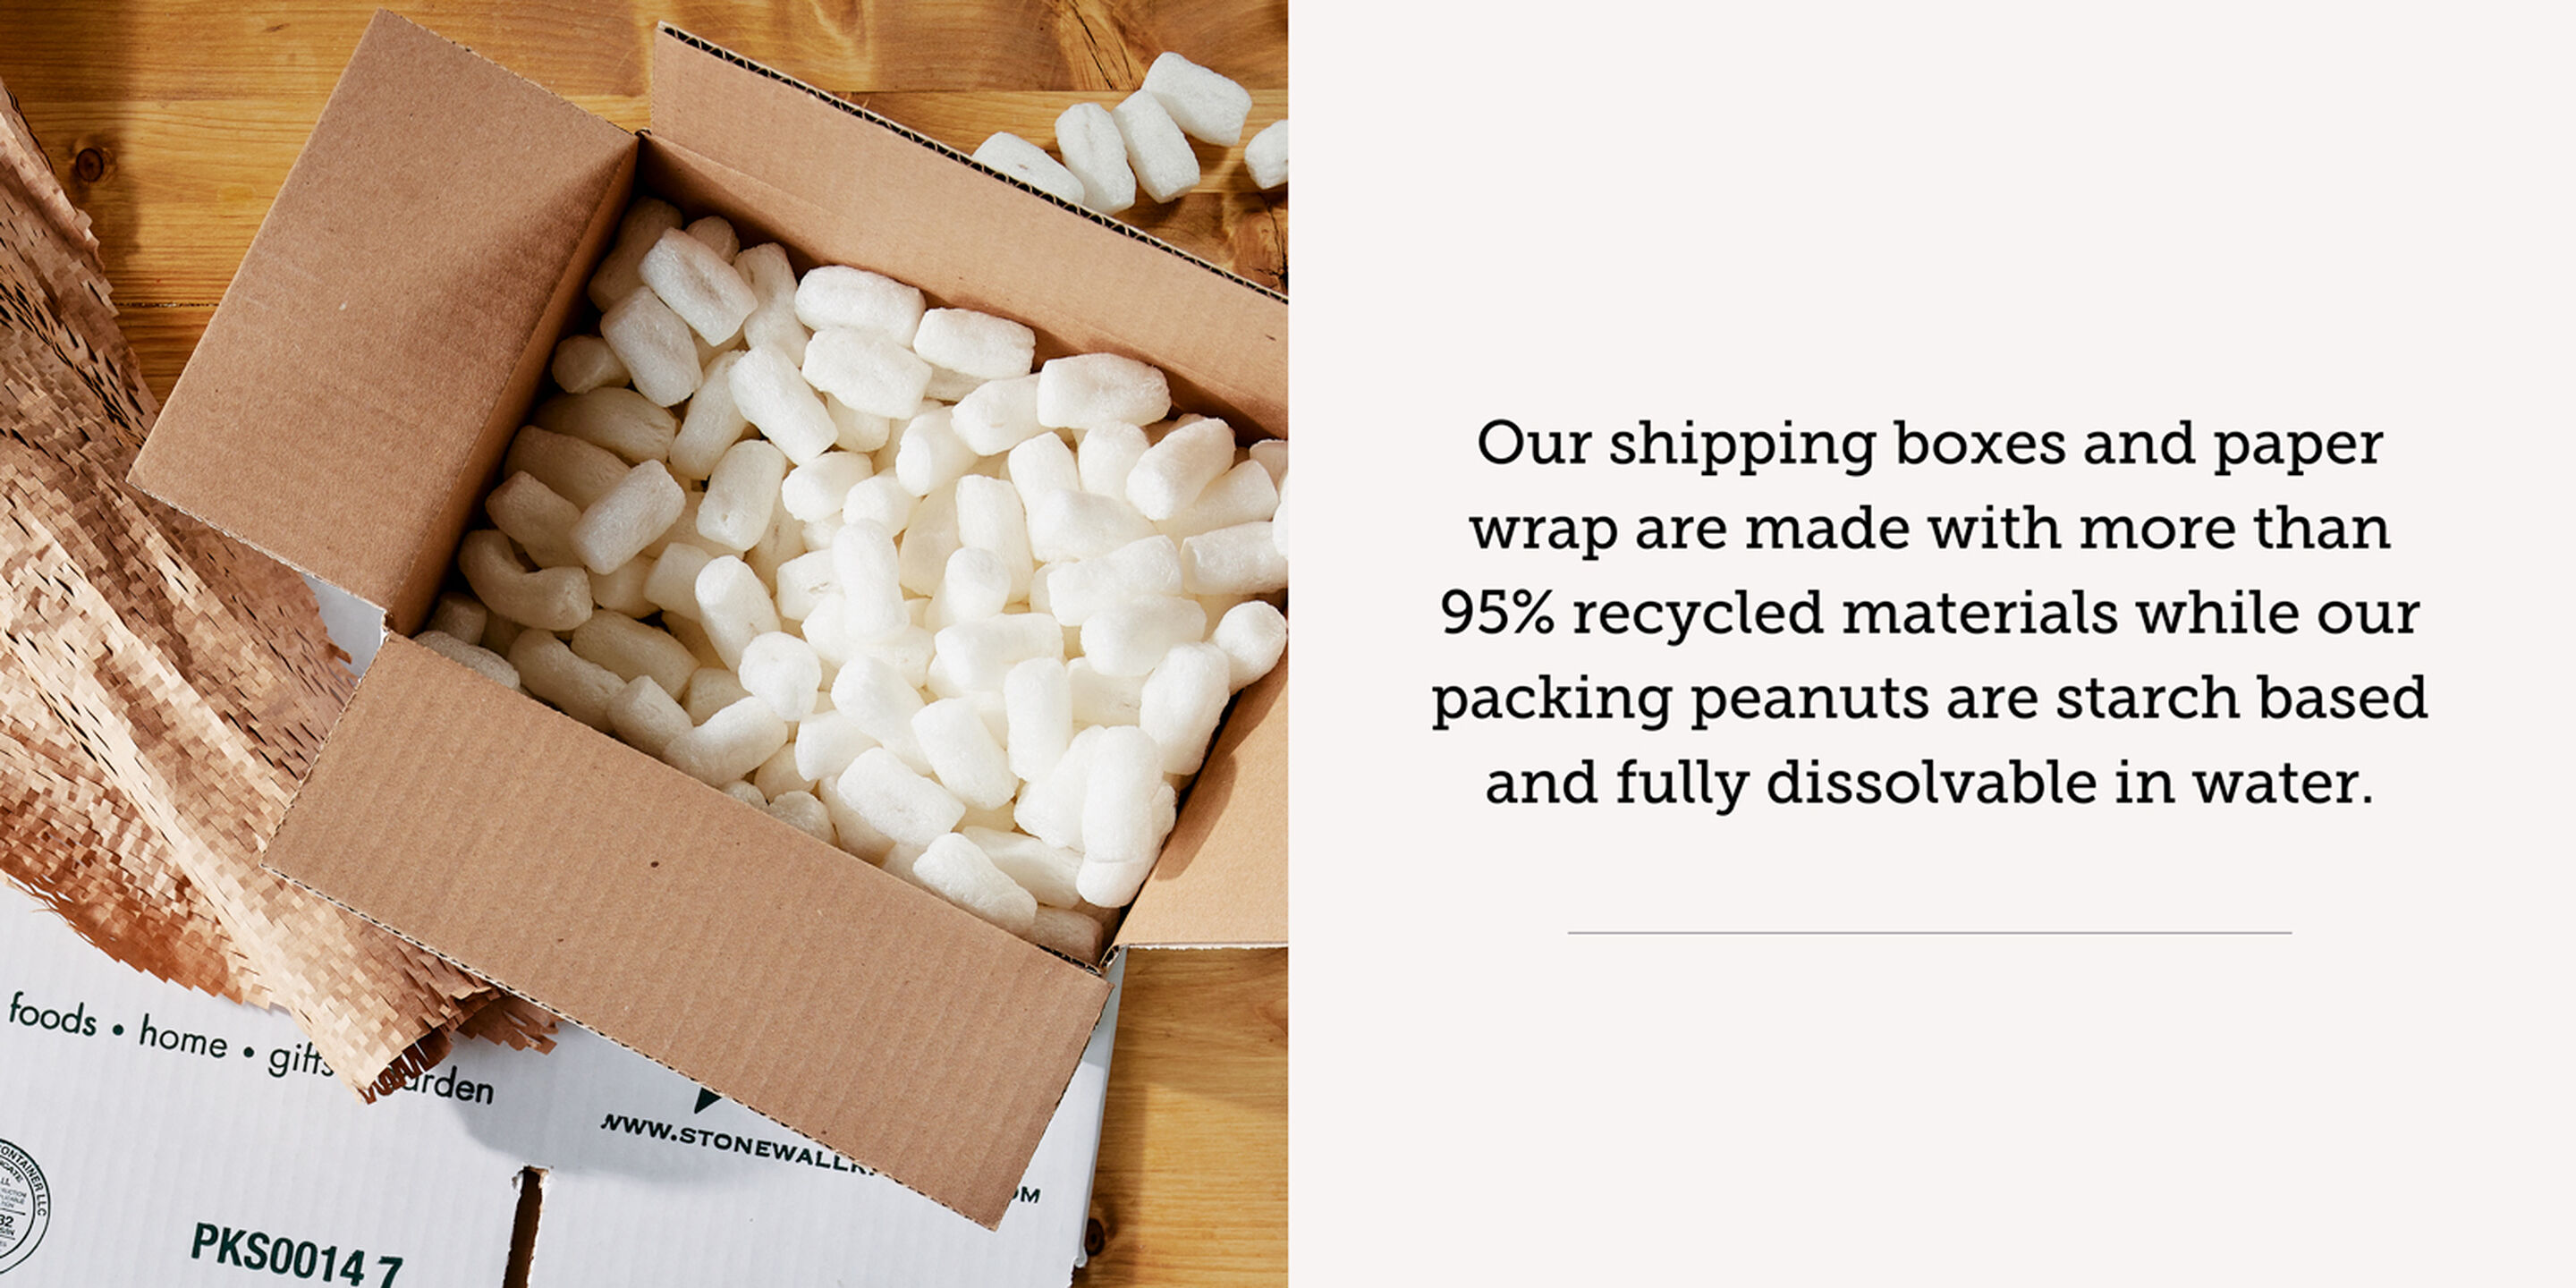 Our shipping boxes and paper wrap are made with more than 95% recycled materials while our packing peanuts are starch based and fully dissolvable with water.